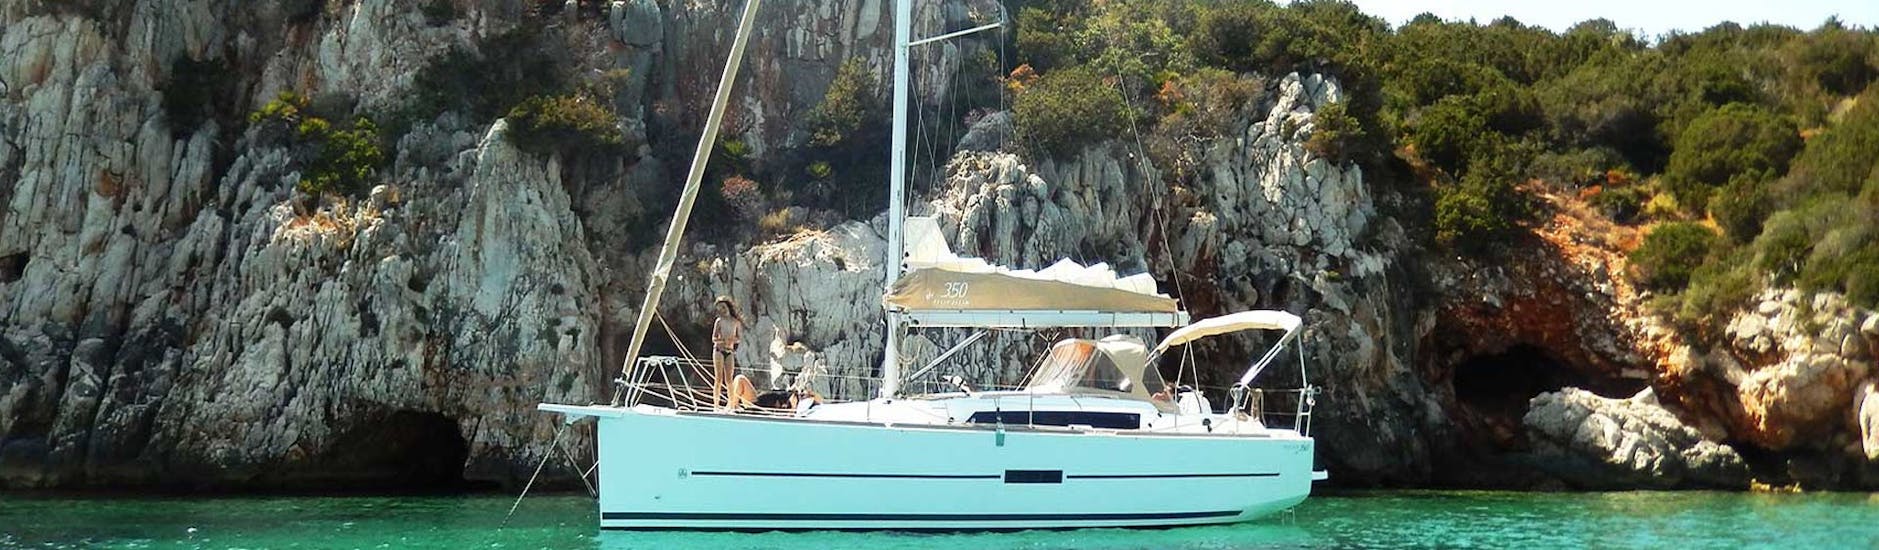 The sailing boat XchéNo during the Private Sailing Boat Trip to the Baia di Alghero with Snorkeling & Lunch.